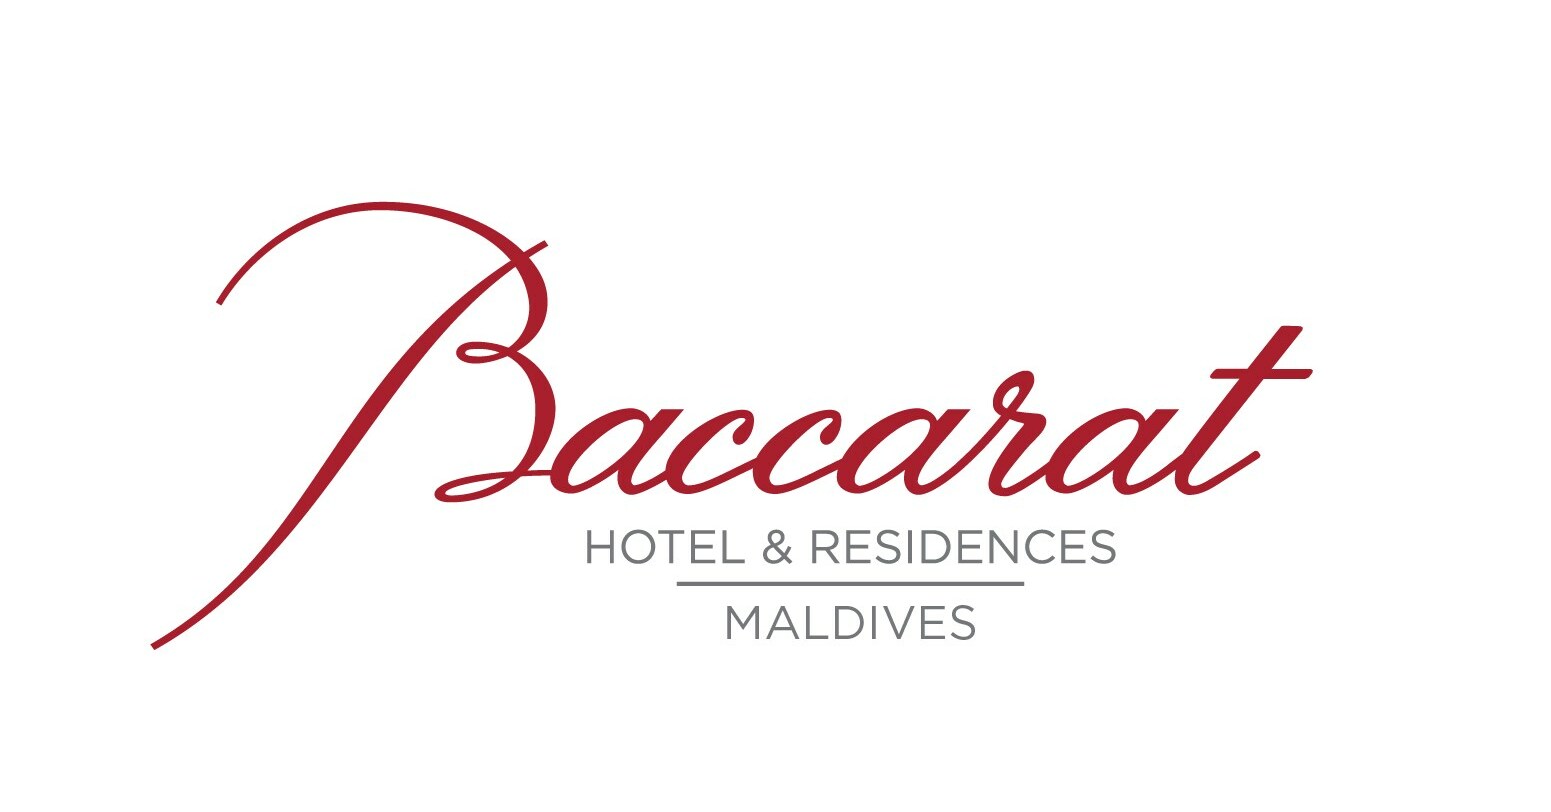 Baccarat Hotel & Residences Maldives to open its Doors in 2027